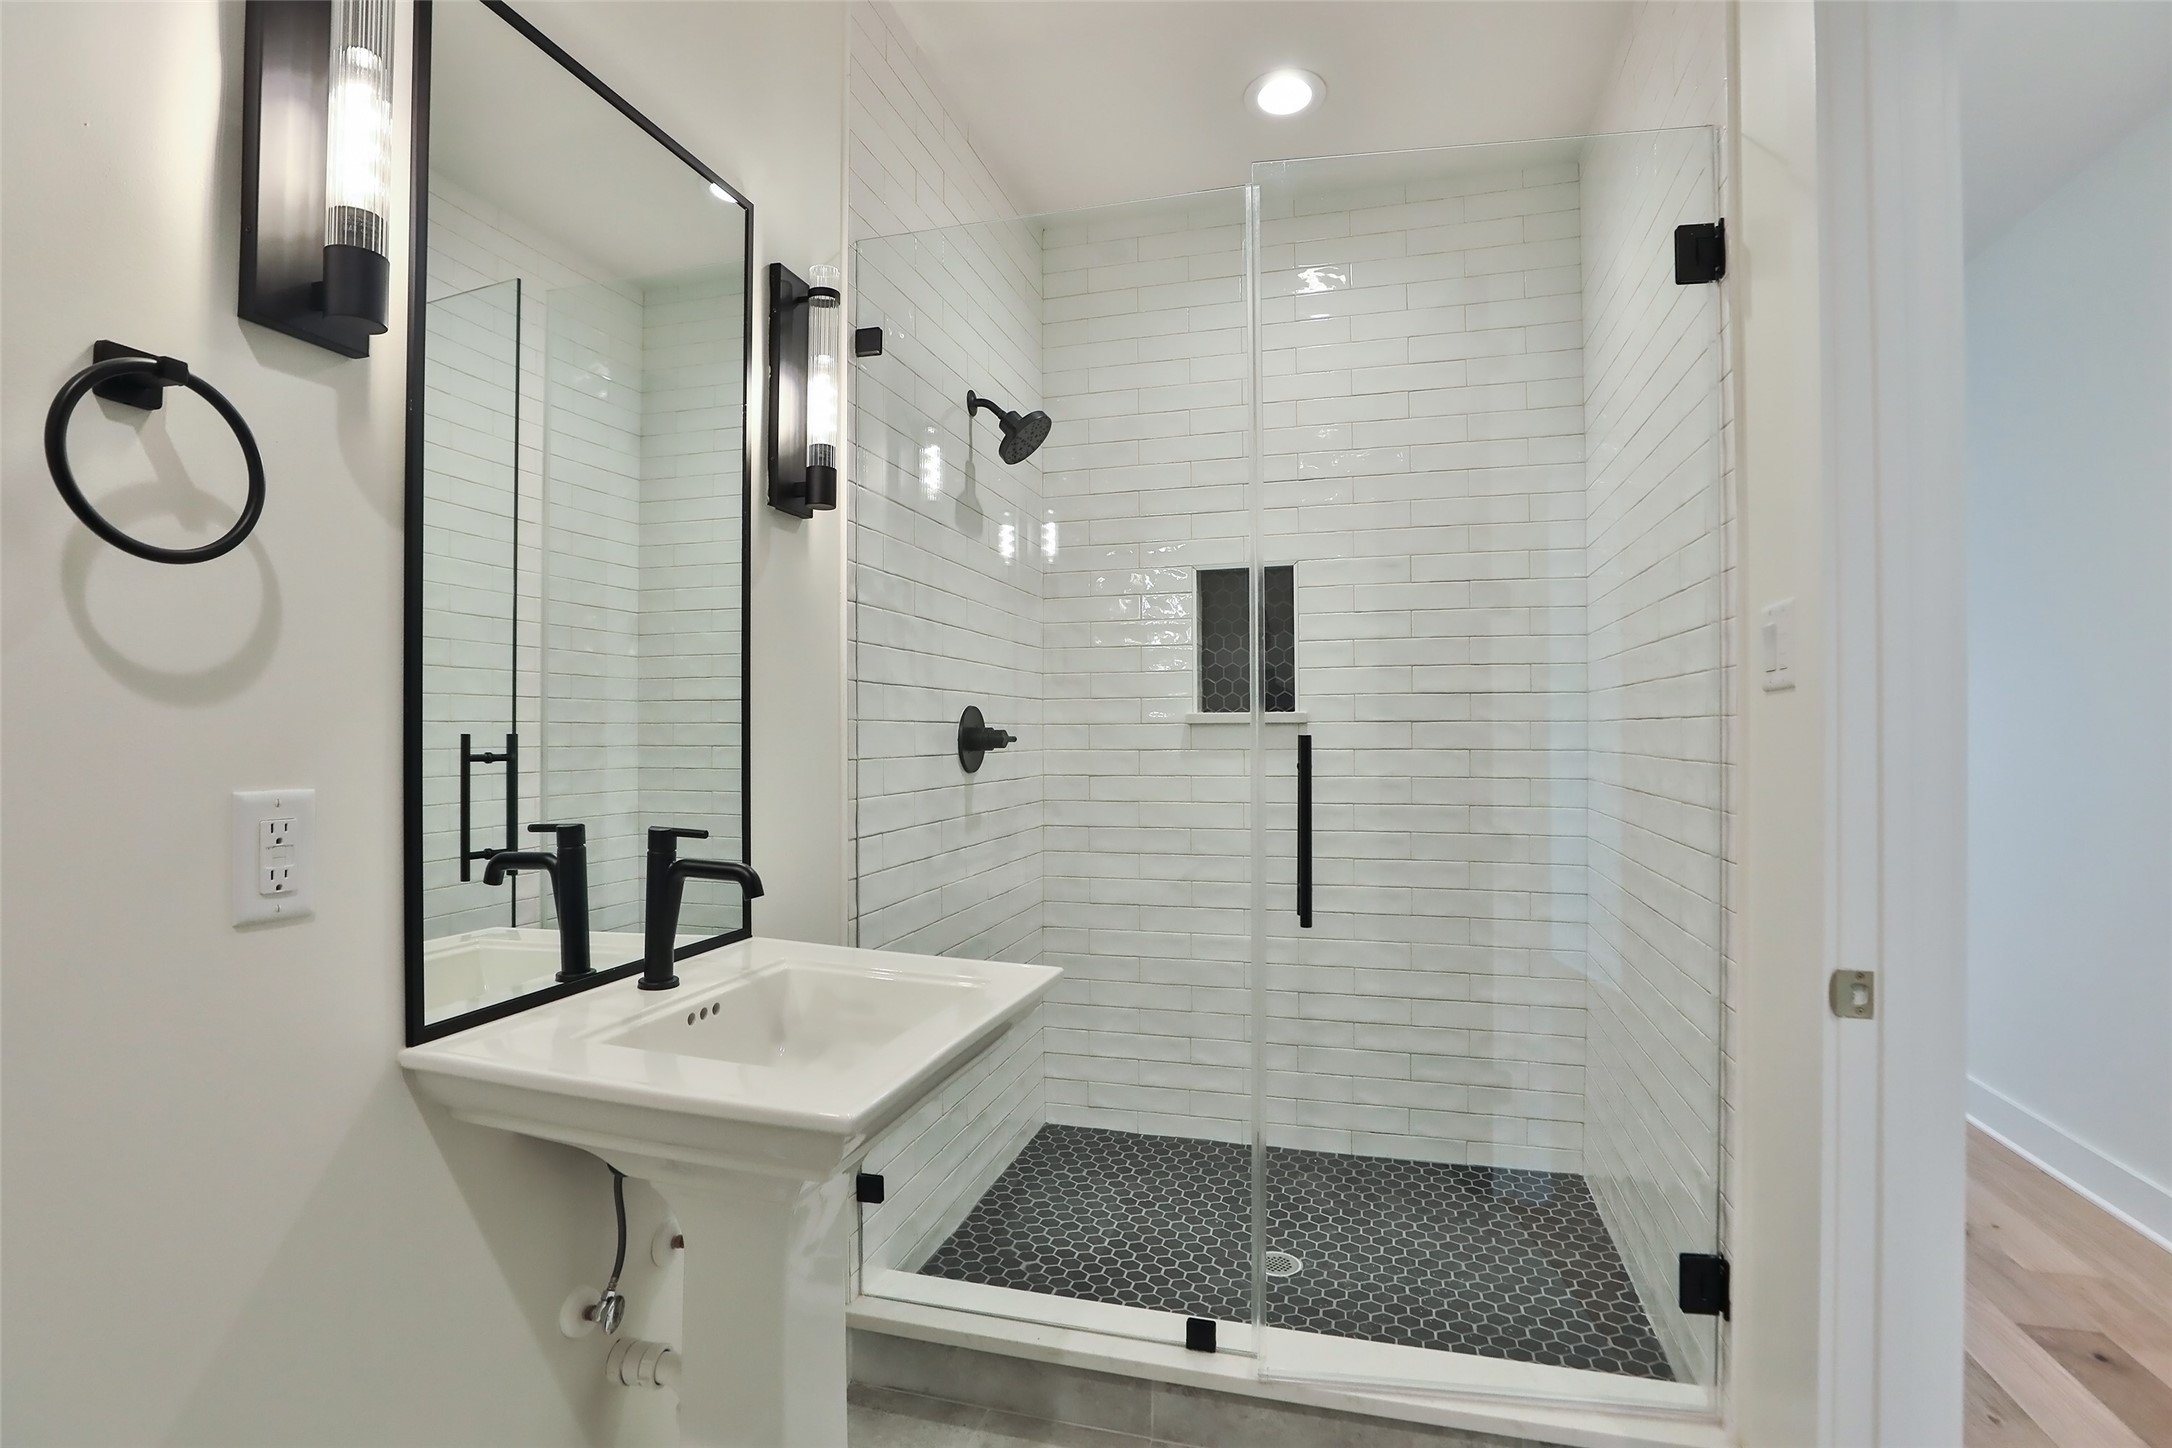 This full bathroom is located on the second floor in the back of the home adjacent to the large room.